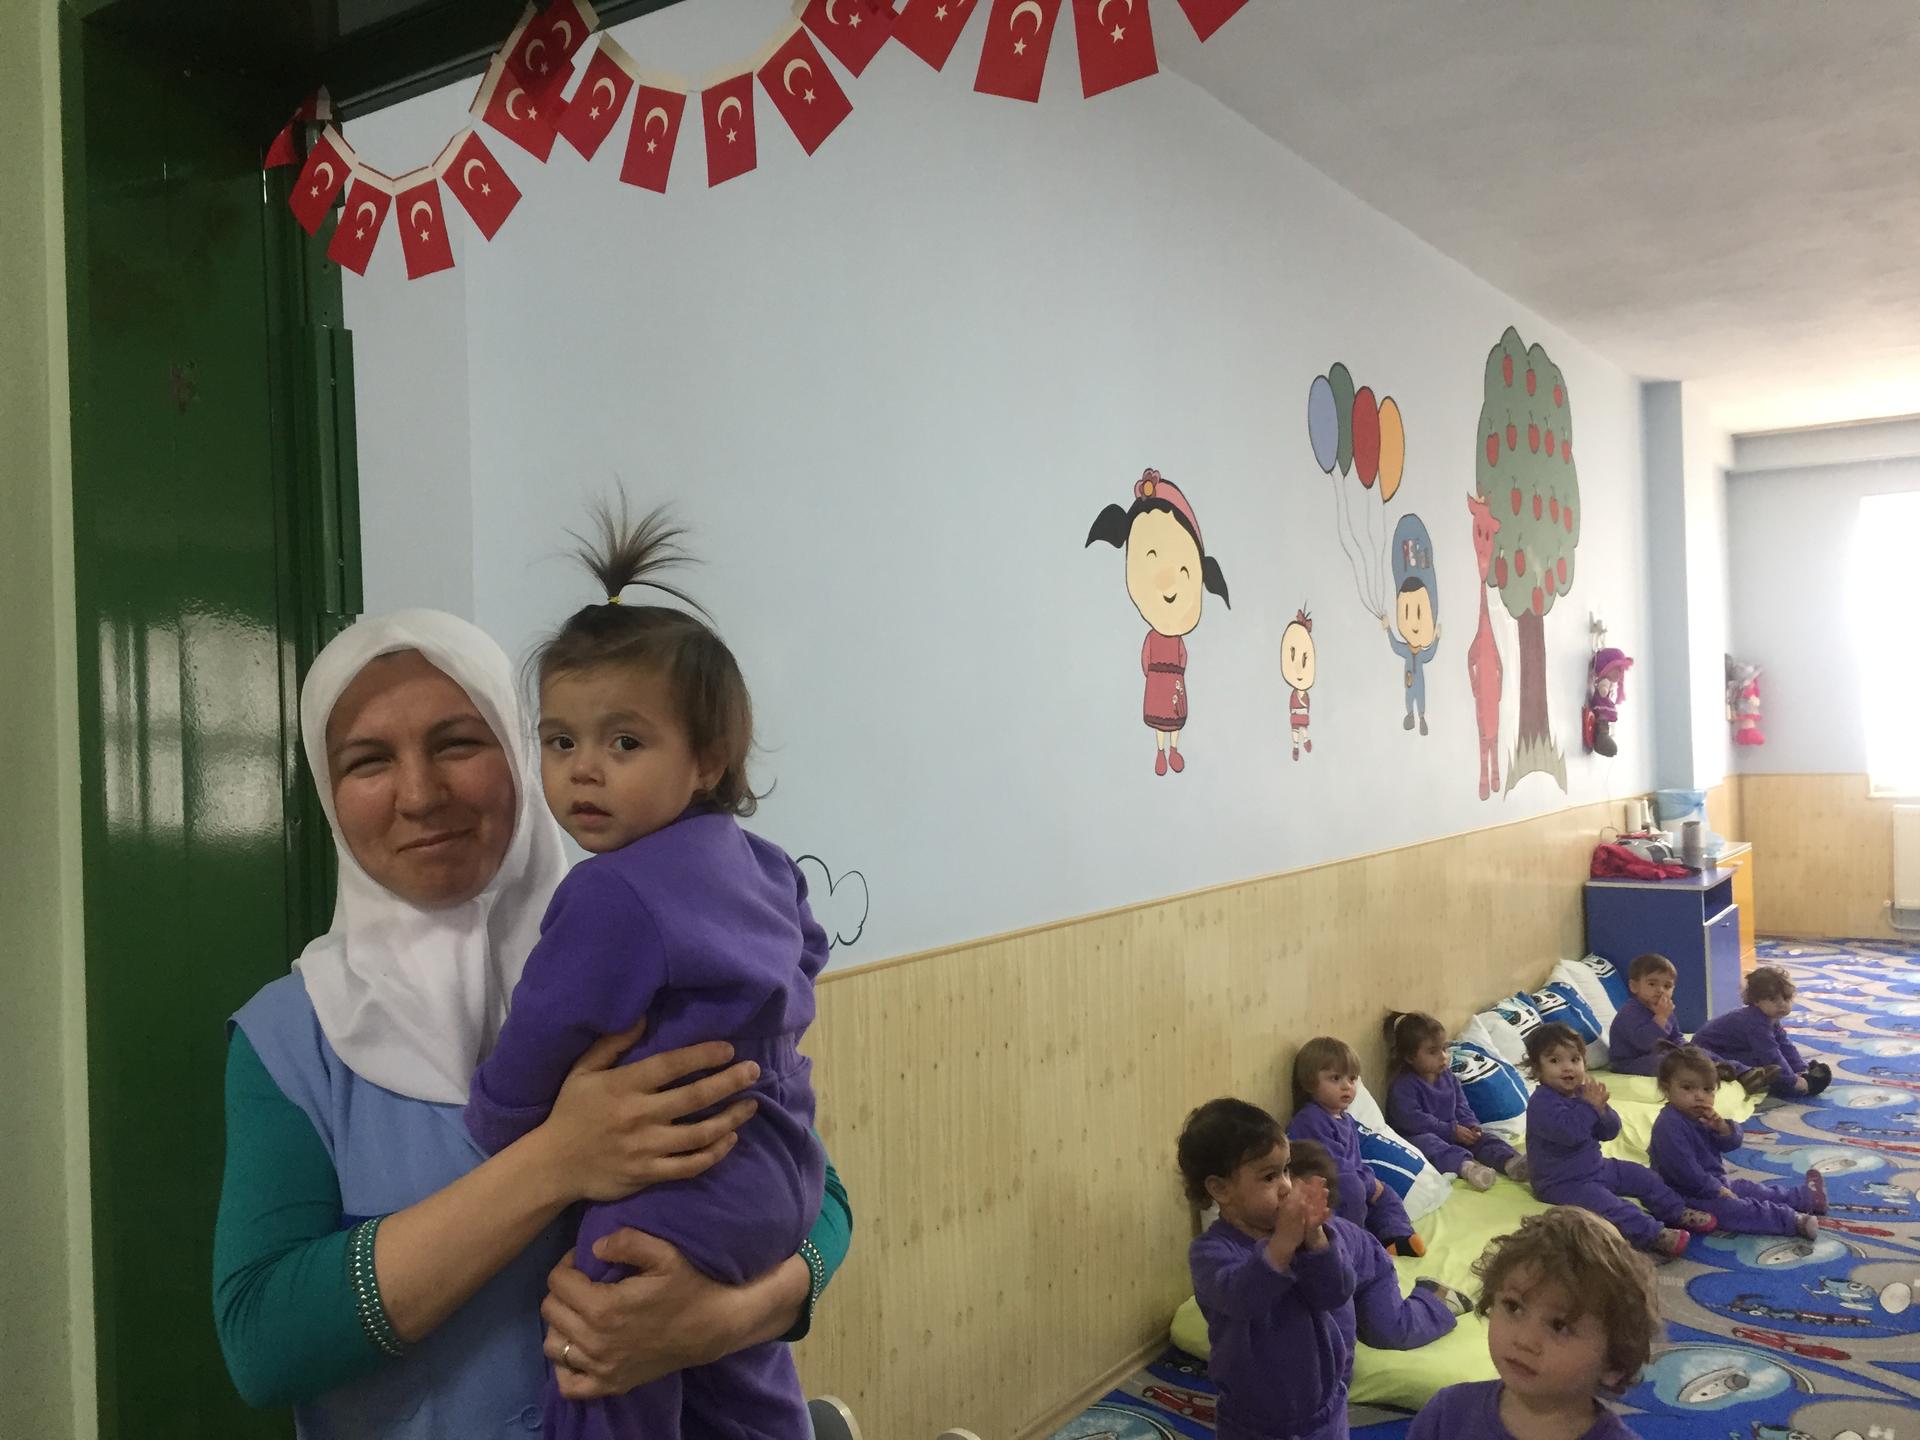 Turkish women struggle to enter the work force but company day care is helping